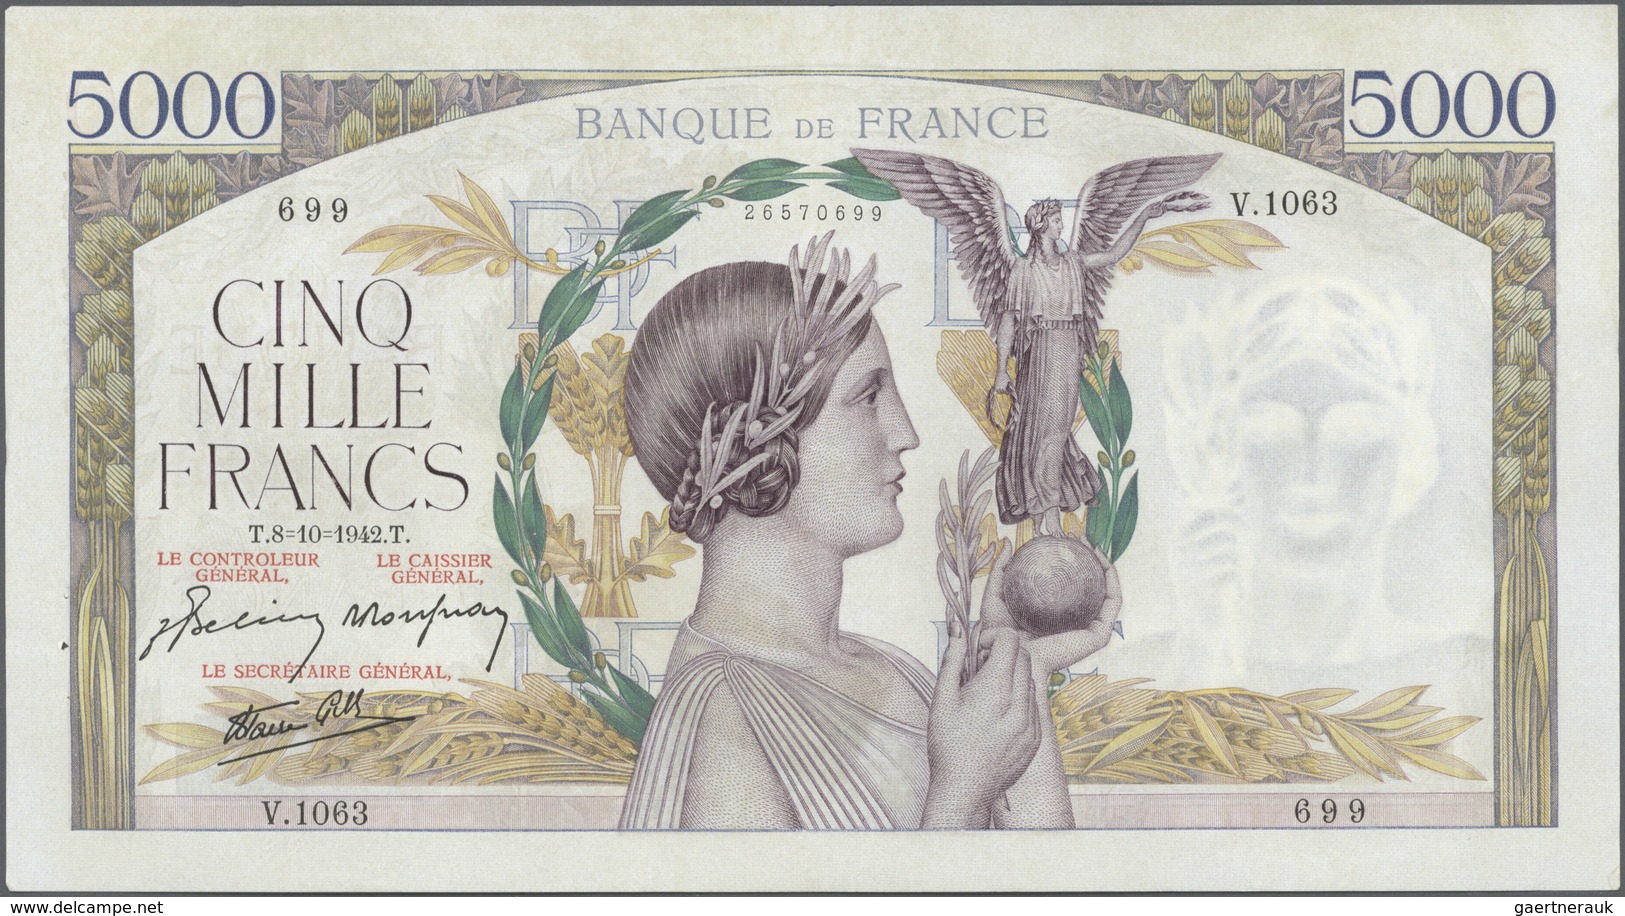 France / Frankreich: large lot of 25 MOSTLY CONSECUTIVE notes of 5000 Francs "Victoire" 1943 P. 97 n